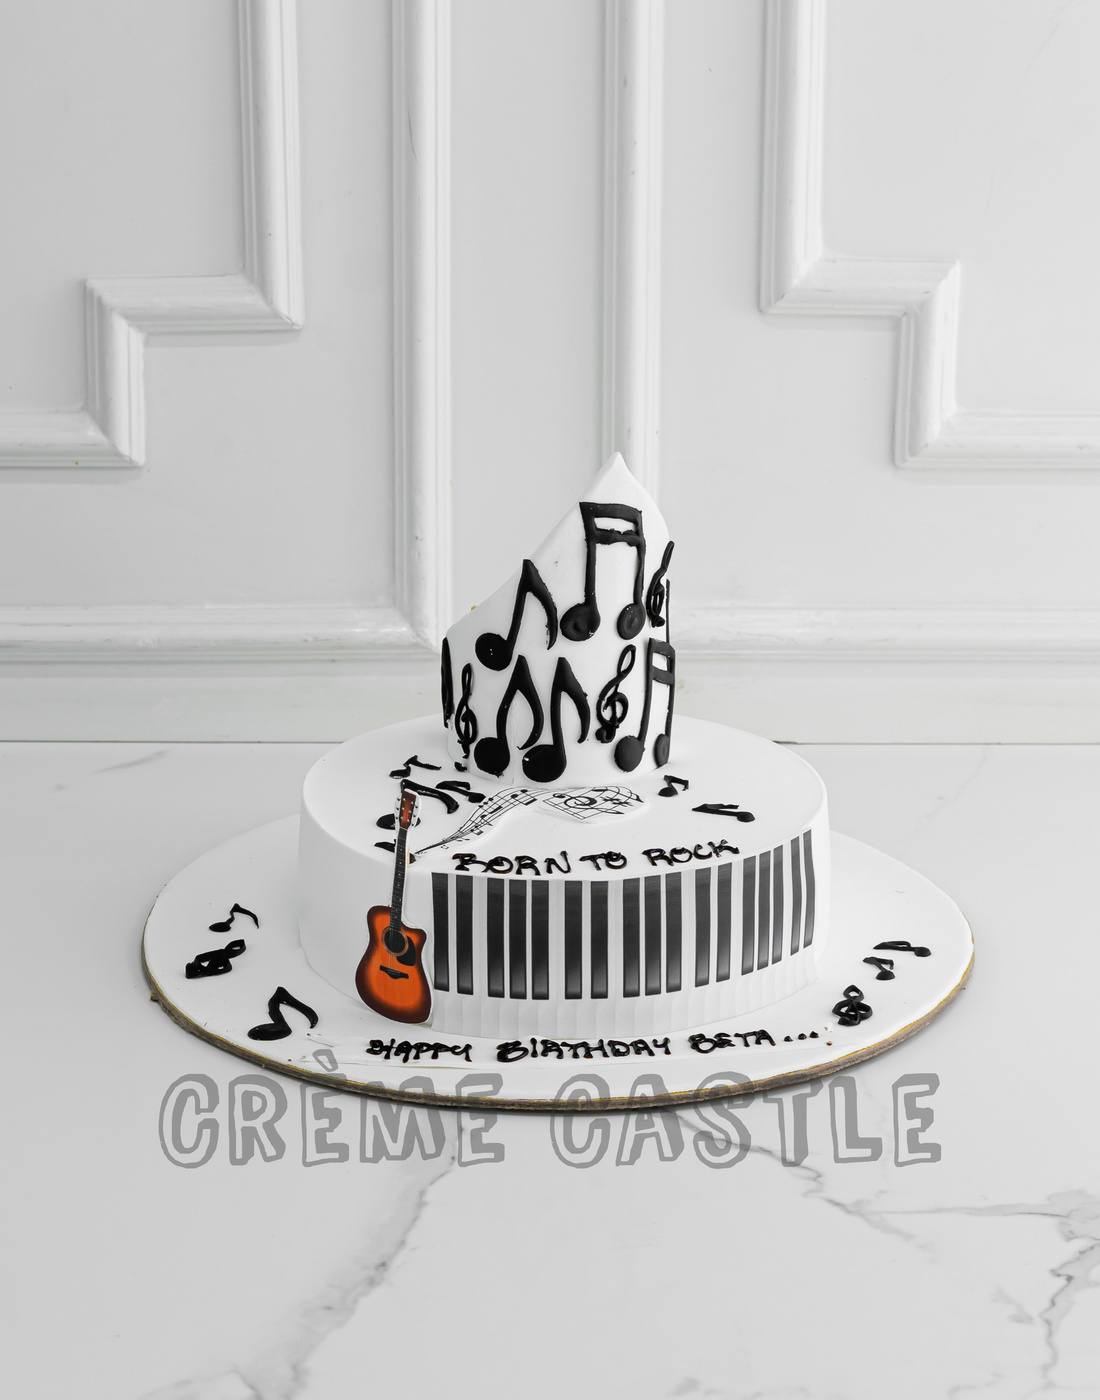 Share more than 158 treble clef cake best - awesomeenglish.edu.vn